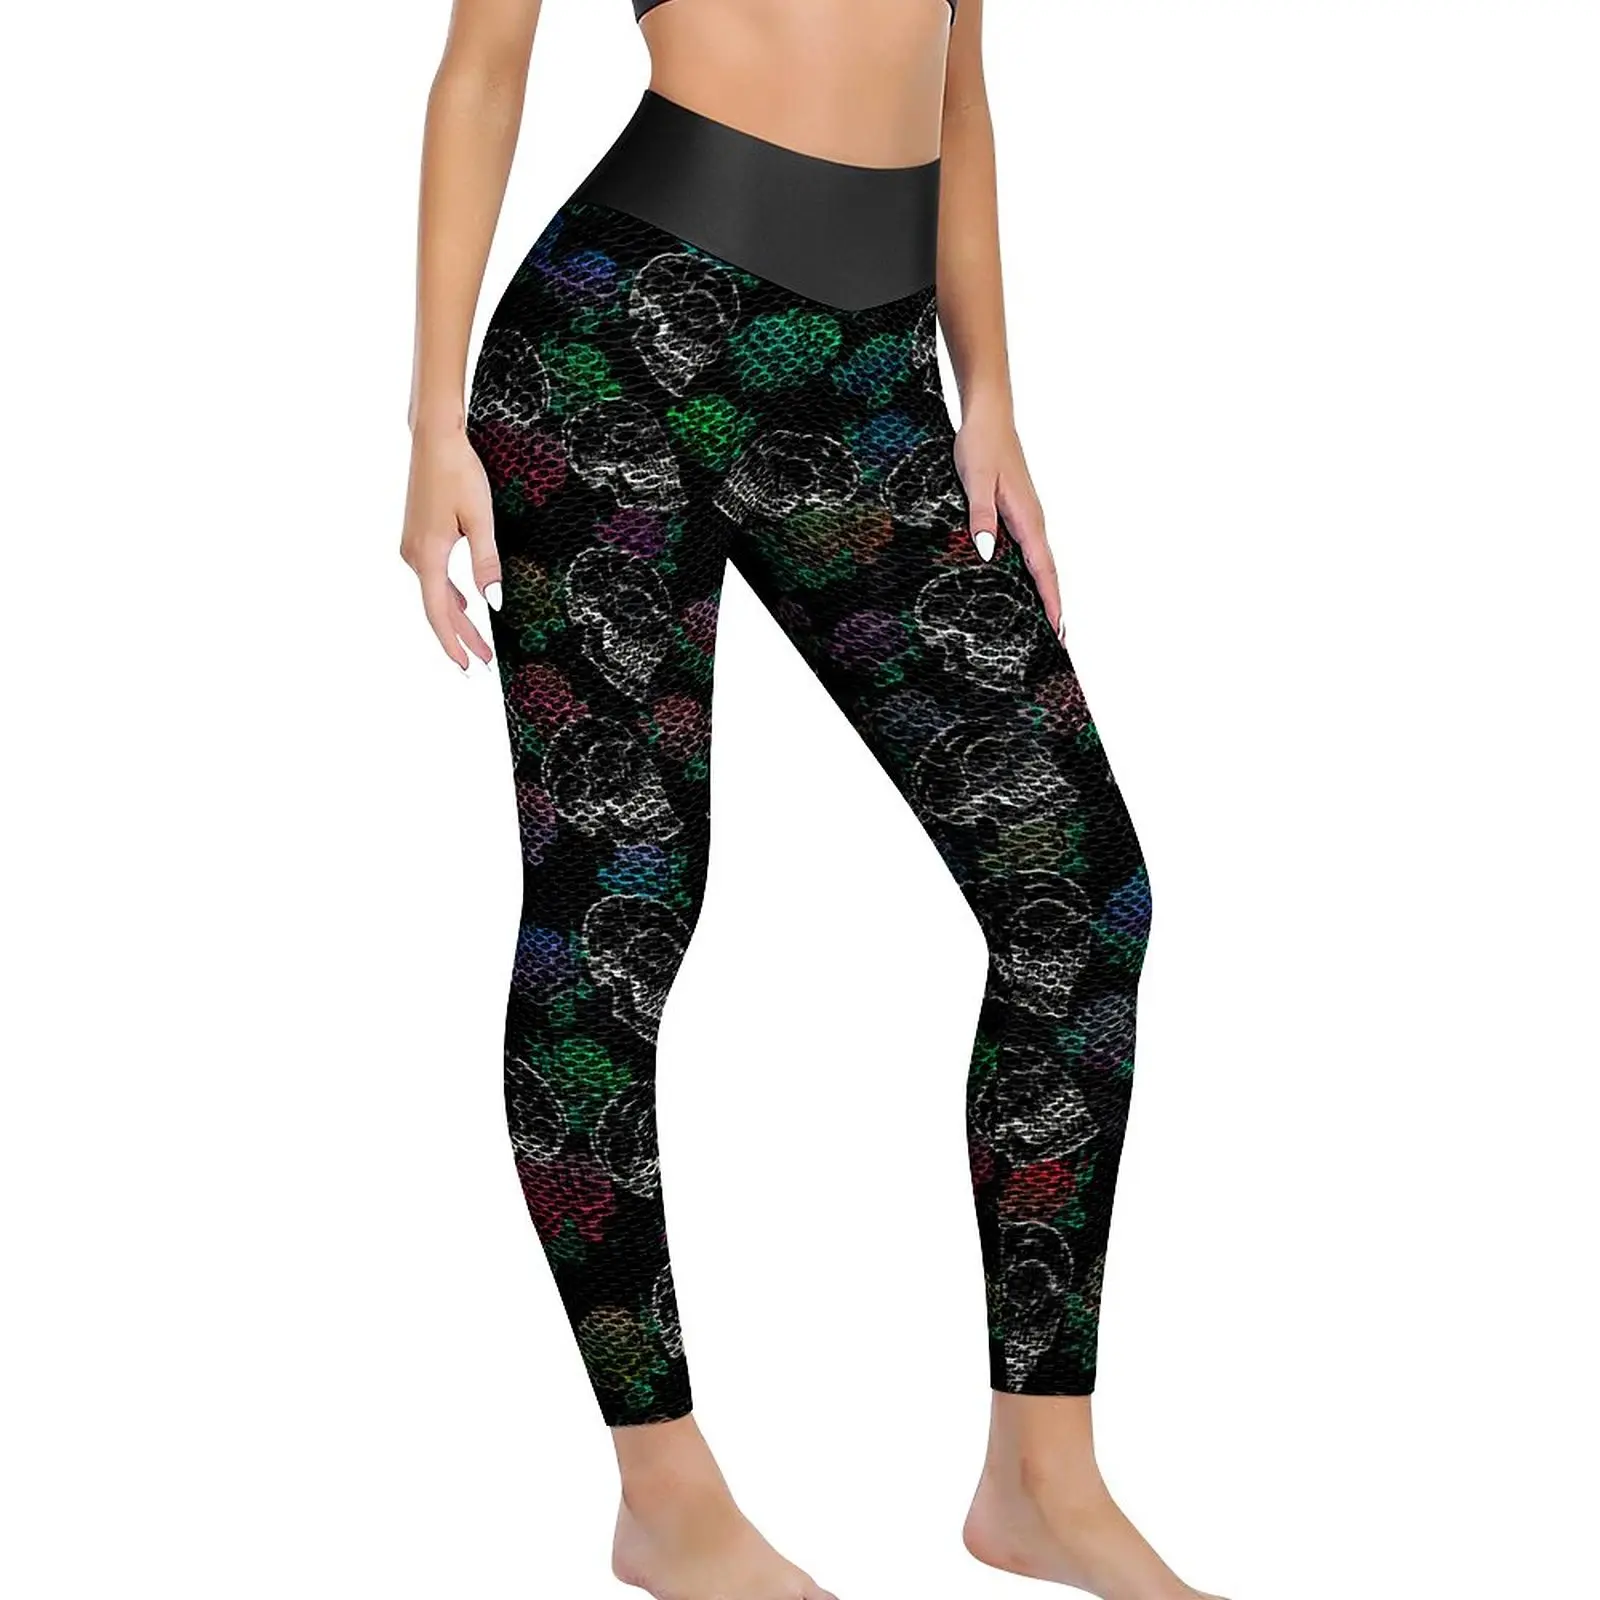 

Floral Sugar Skull Leggings Ombre Roses Print Girly Pastel Fitness Gym Yoga Pants Push Up Sports Tights Retro Graphic Leggins